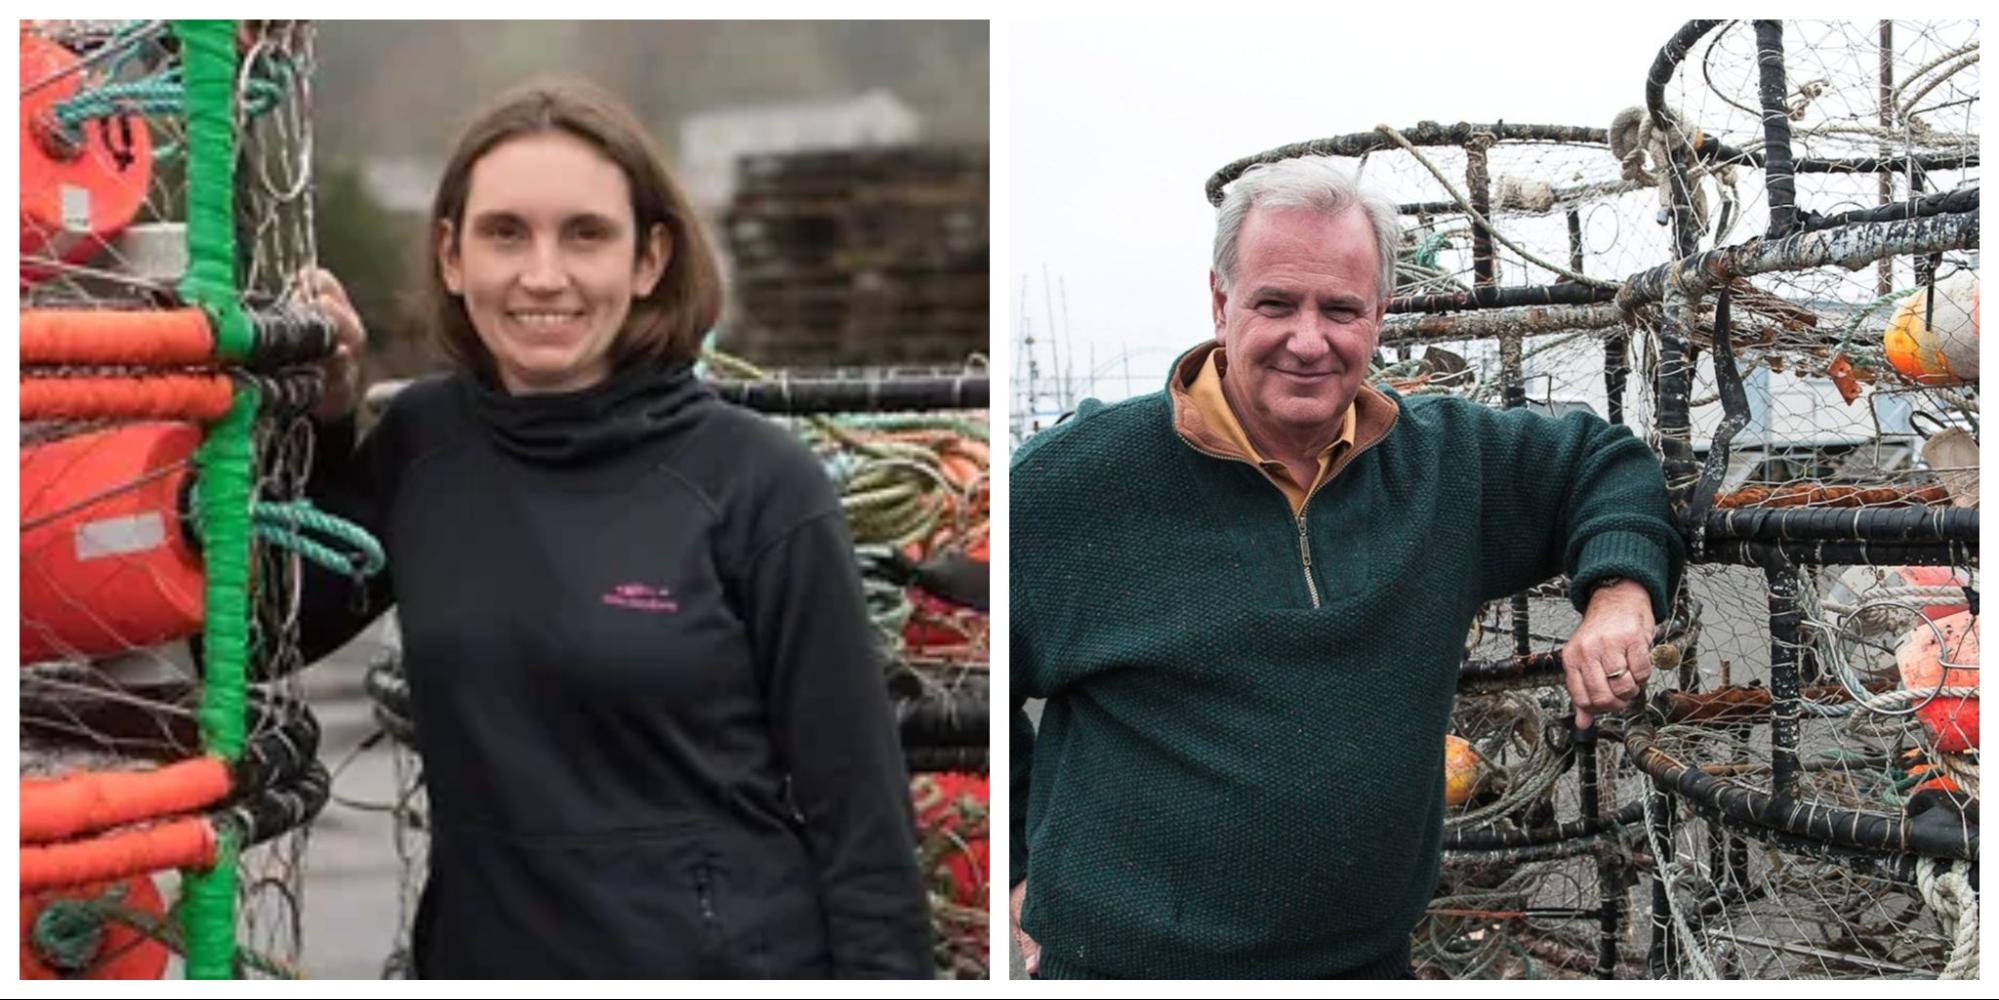 Katey Jacobson and David Gomberg smile and stand near crabbing traps.